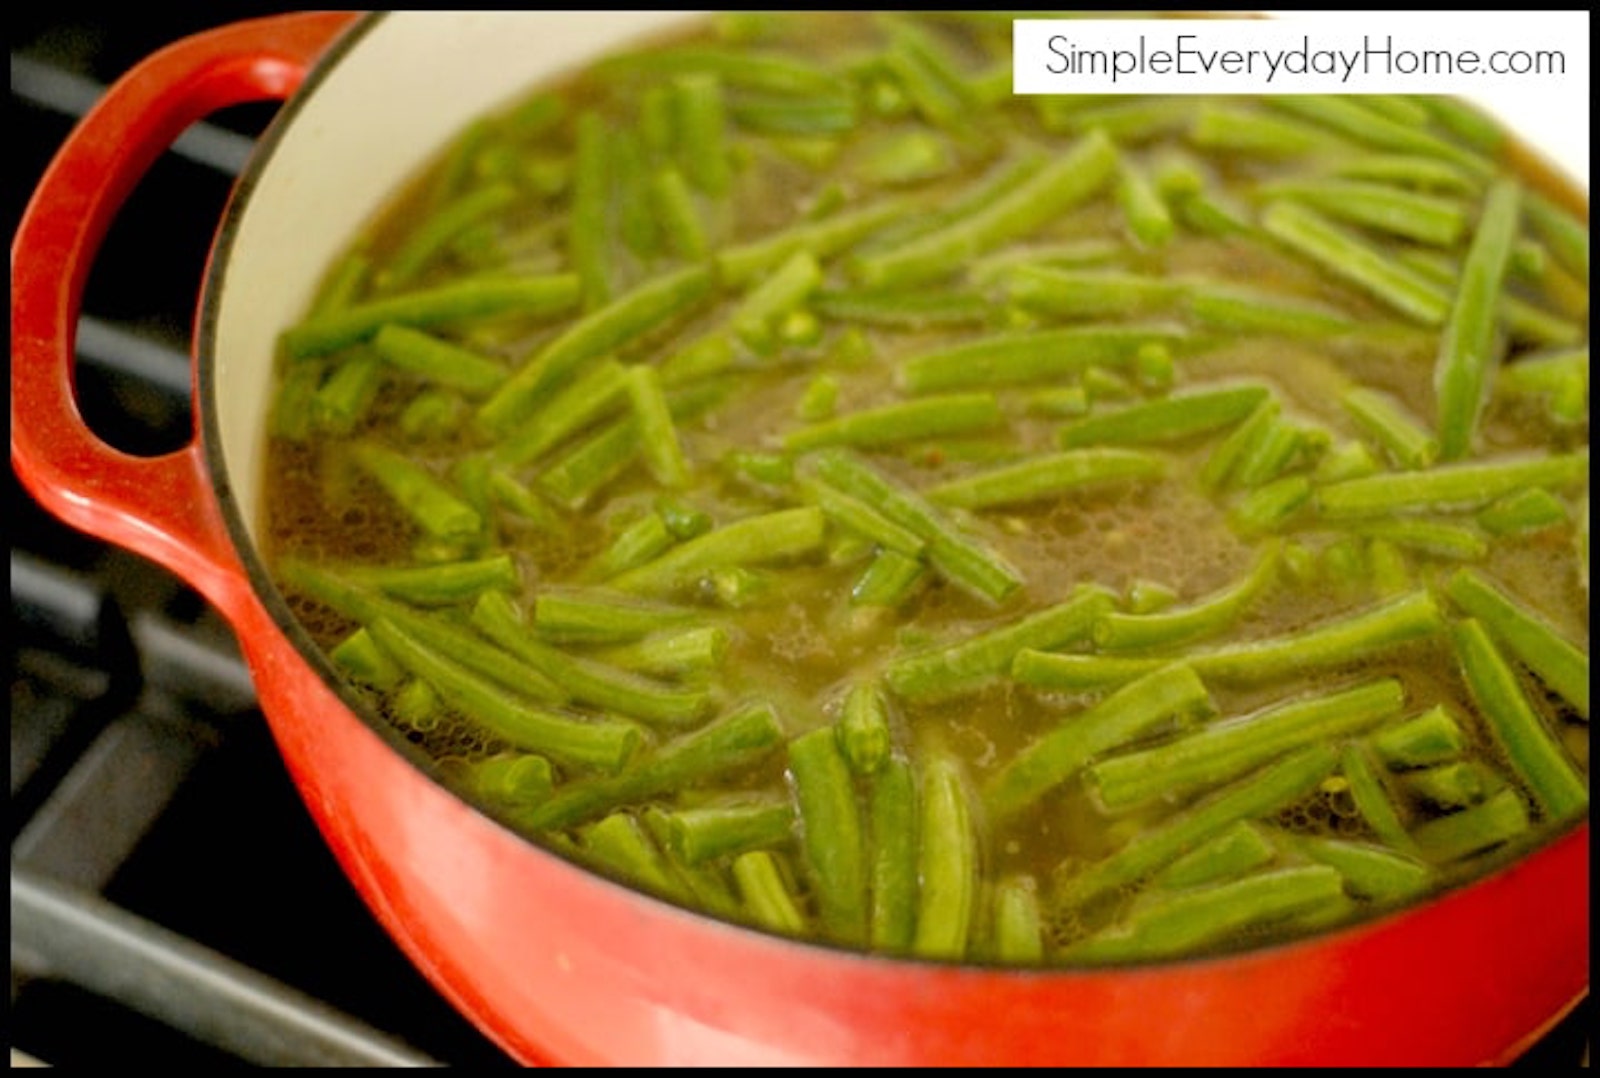 Best Ever Dutch Oven Green Beans Recipe - Simple Everyday Home